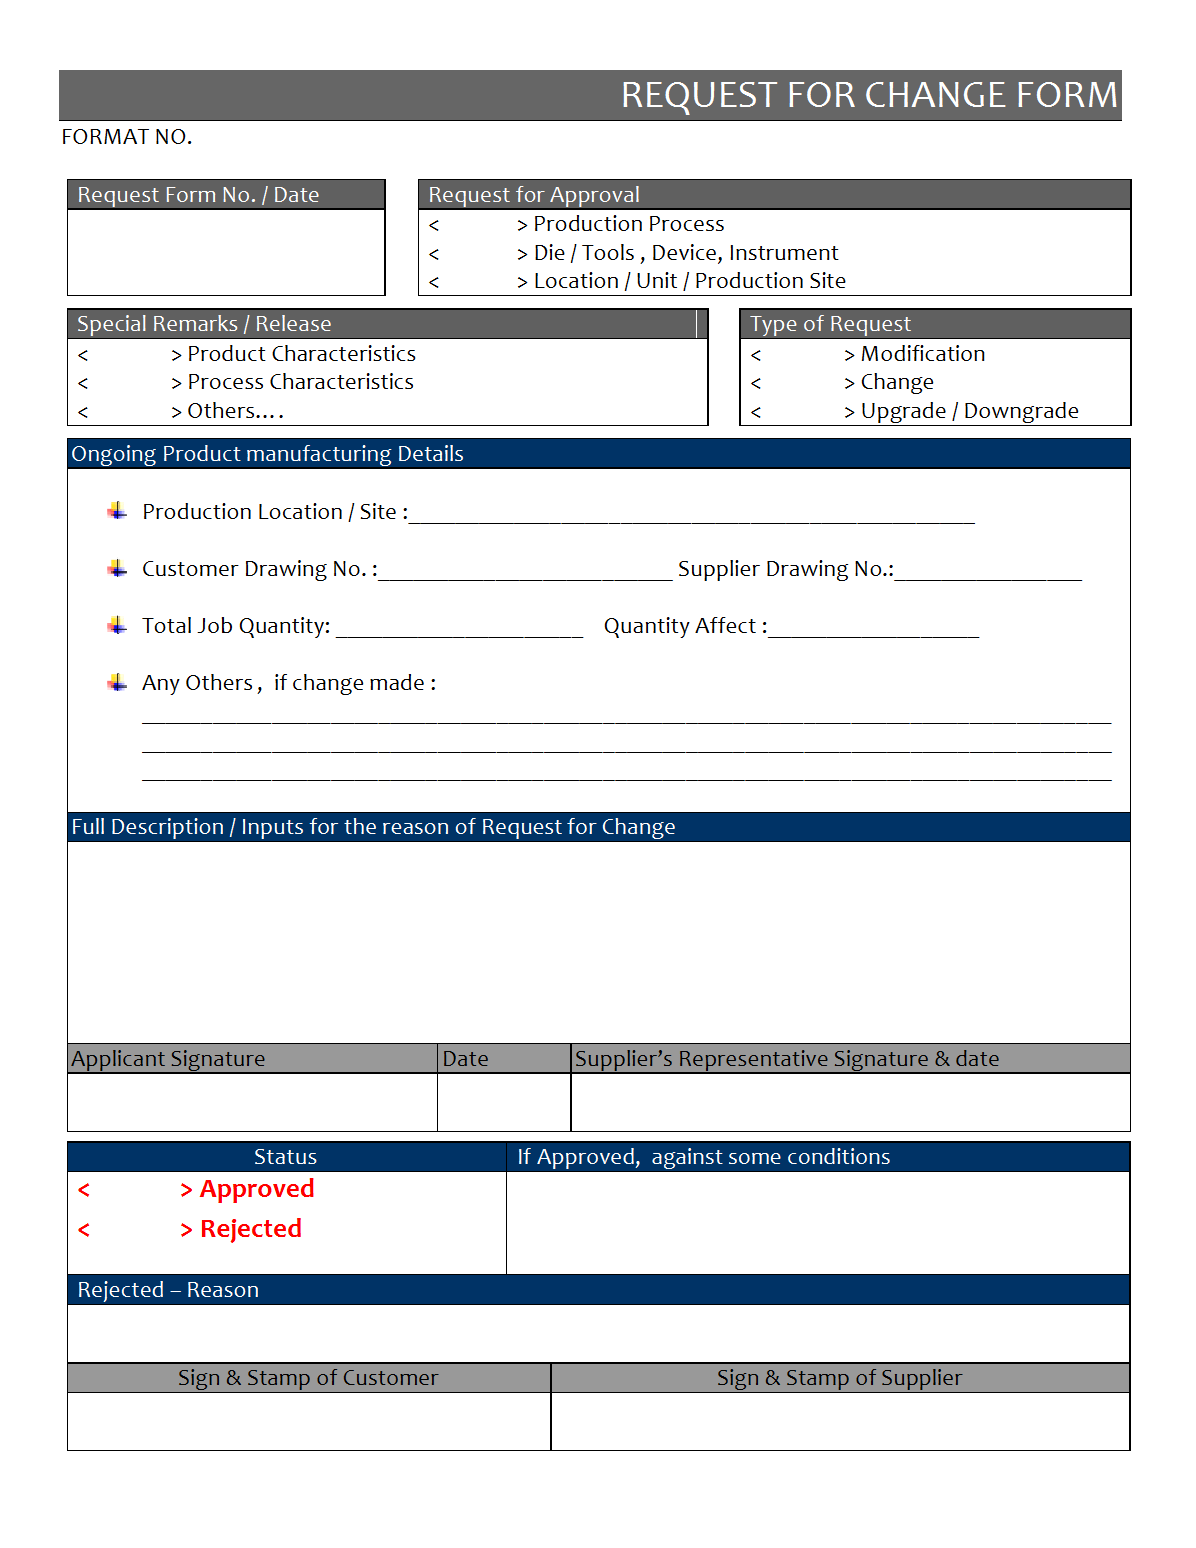 request-for-change-form